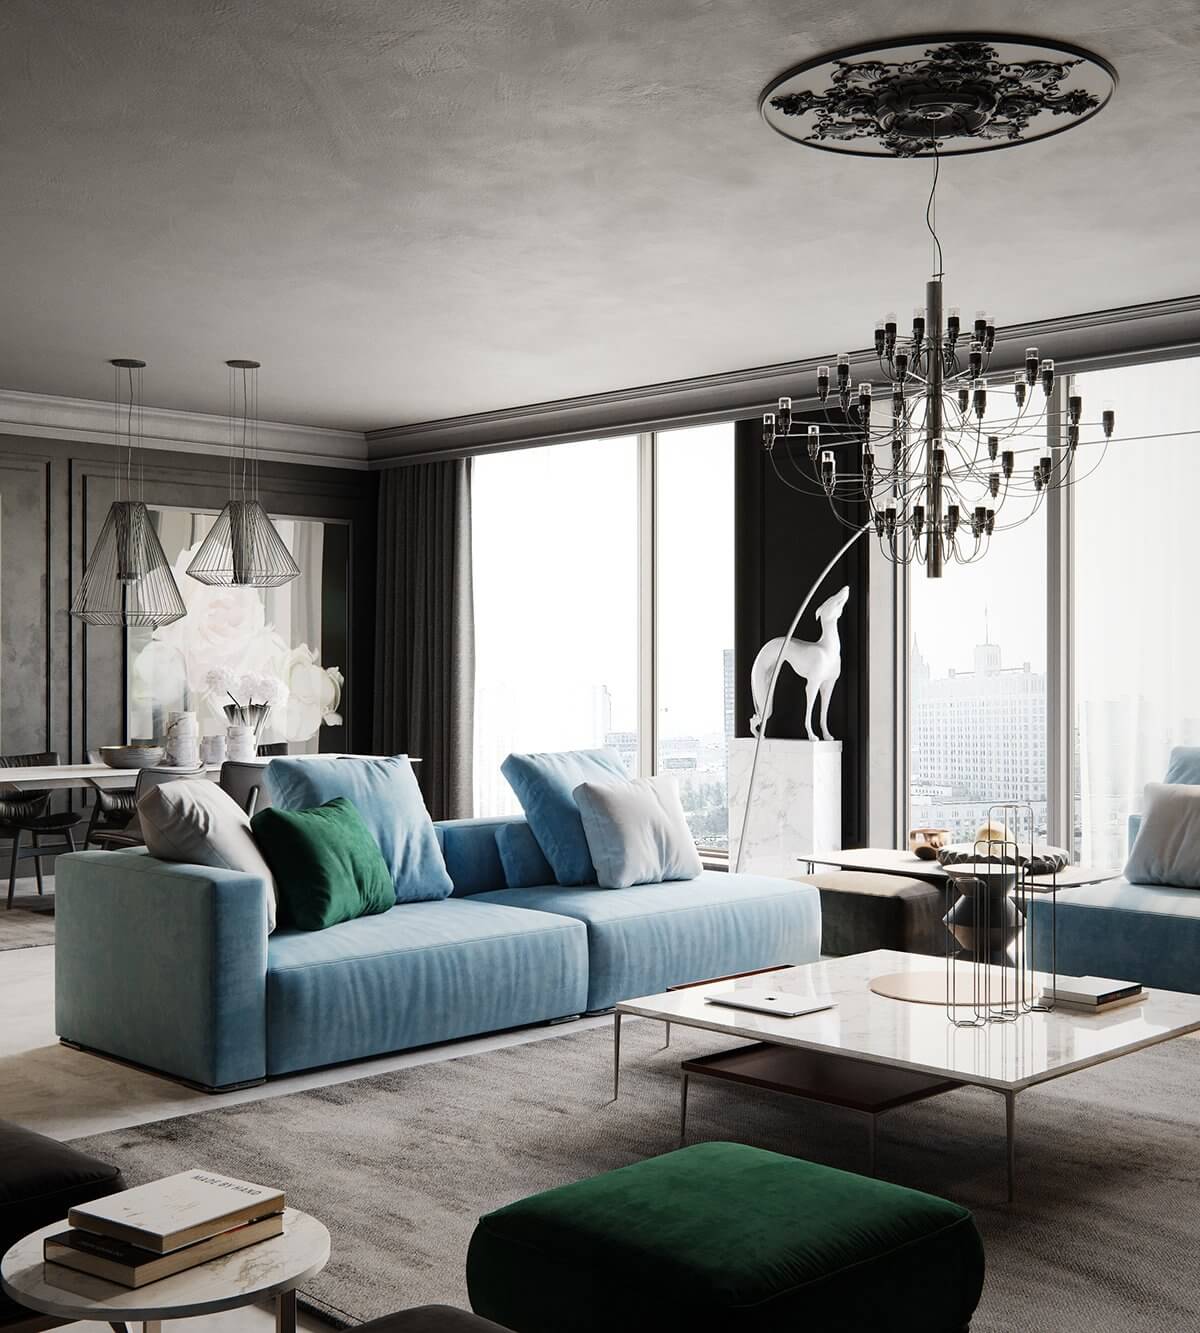 Moscow apartment living room table - cgi visualization